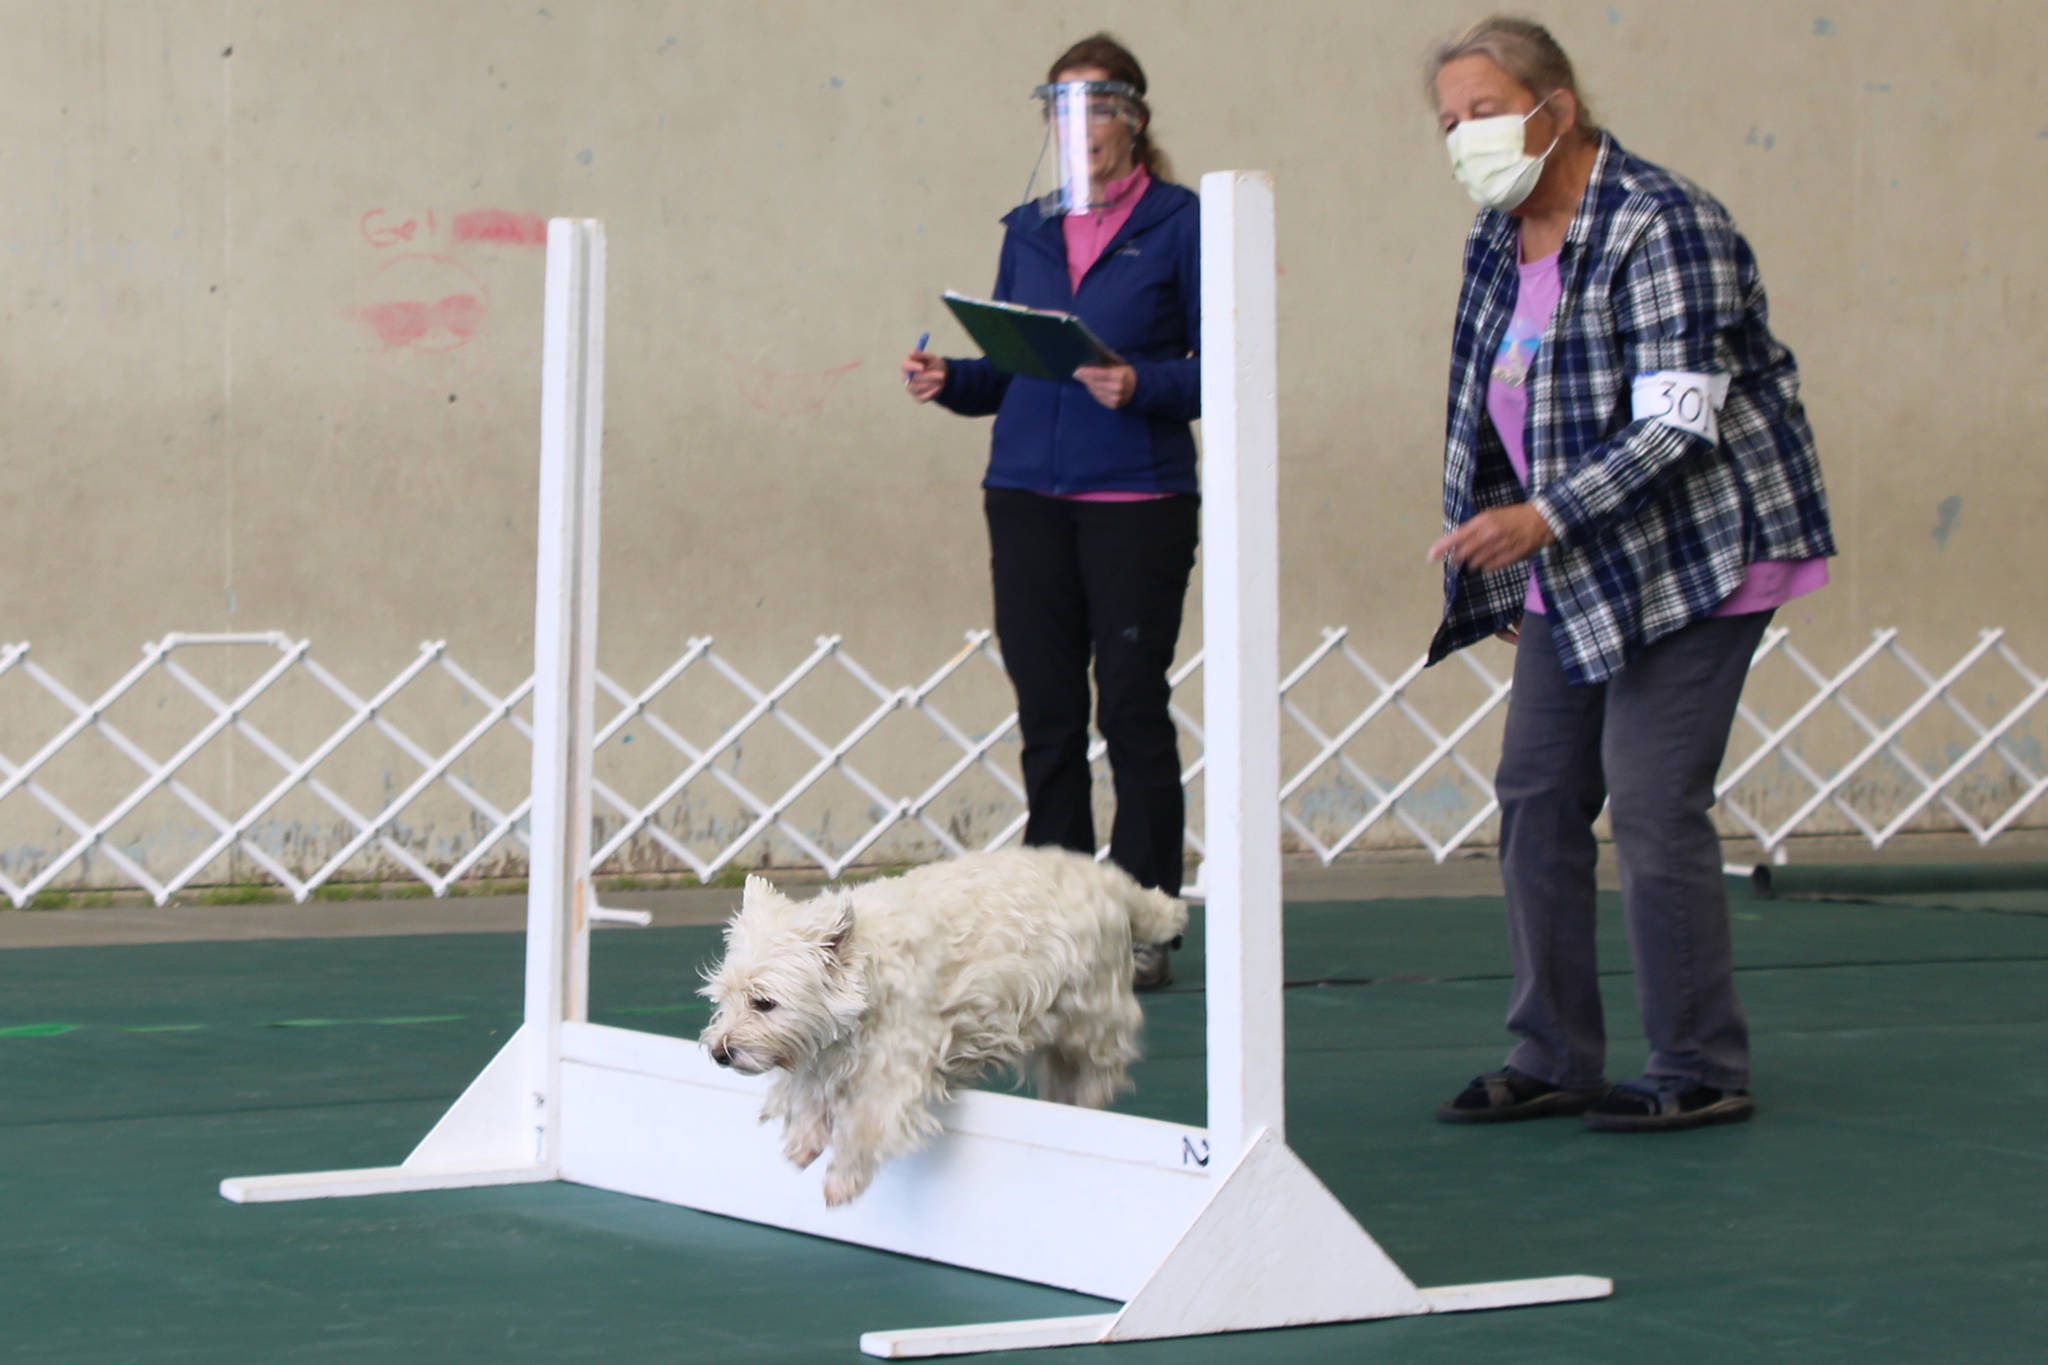 Breckan completes the high jump during Capital Kennel Club of Juneau’s obedience trials, Saturday, Aug. 29, 2020 in the covered play area outside Auke Bay Elementary School while United Kennel Club judge Gina Vose and owner Jill Grose look on. (Ben Hohenstatt / Juneau Empire)